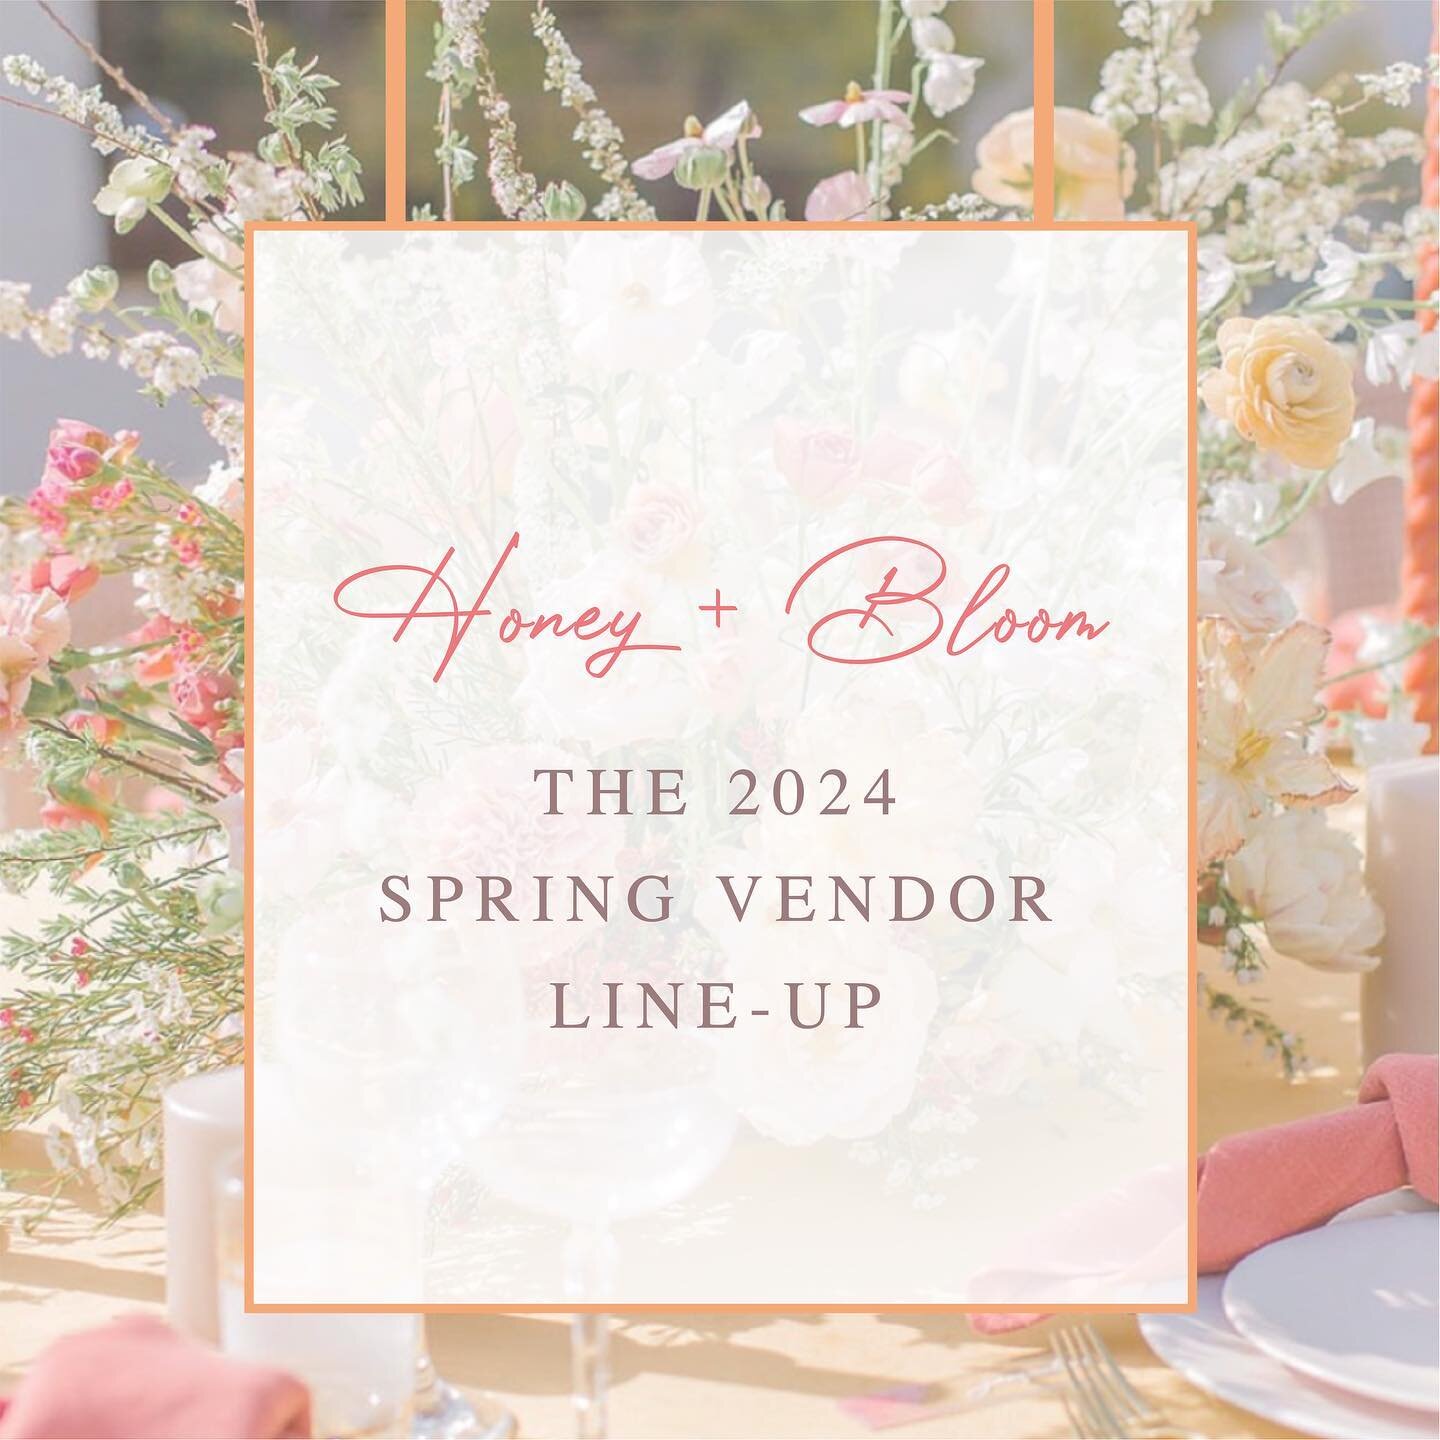 There will be lots of amazing spring vendors (and of course the local shops) for you to check out at Honey + Bloom! Join us next Saturday April 13th from 10:00am to 4:00pm for some shopping. 🛍️💐

👉🏻 Head to the Honey + Bloom event page on our web